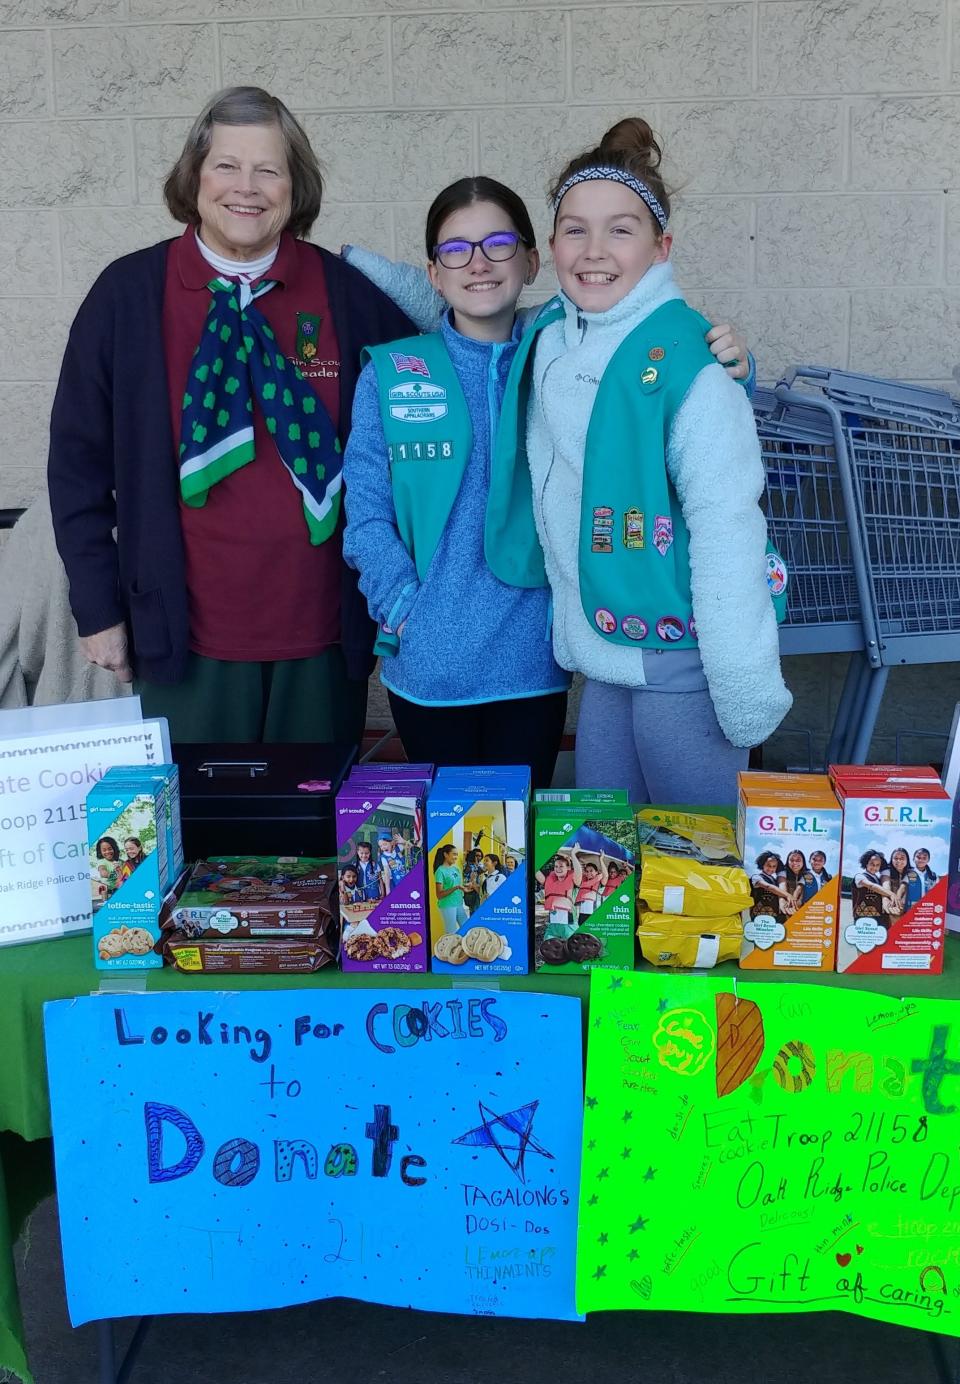 Oak Ridge Girl Scout leader Jerralyn Luckmann and Troop 21158 members Danielle Ellis and Vivian Sullivan sell Girl Scout cookies at their booth last year.